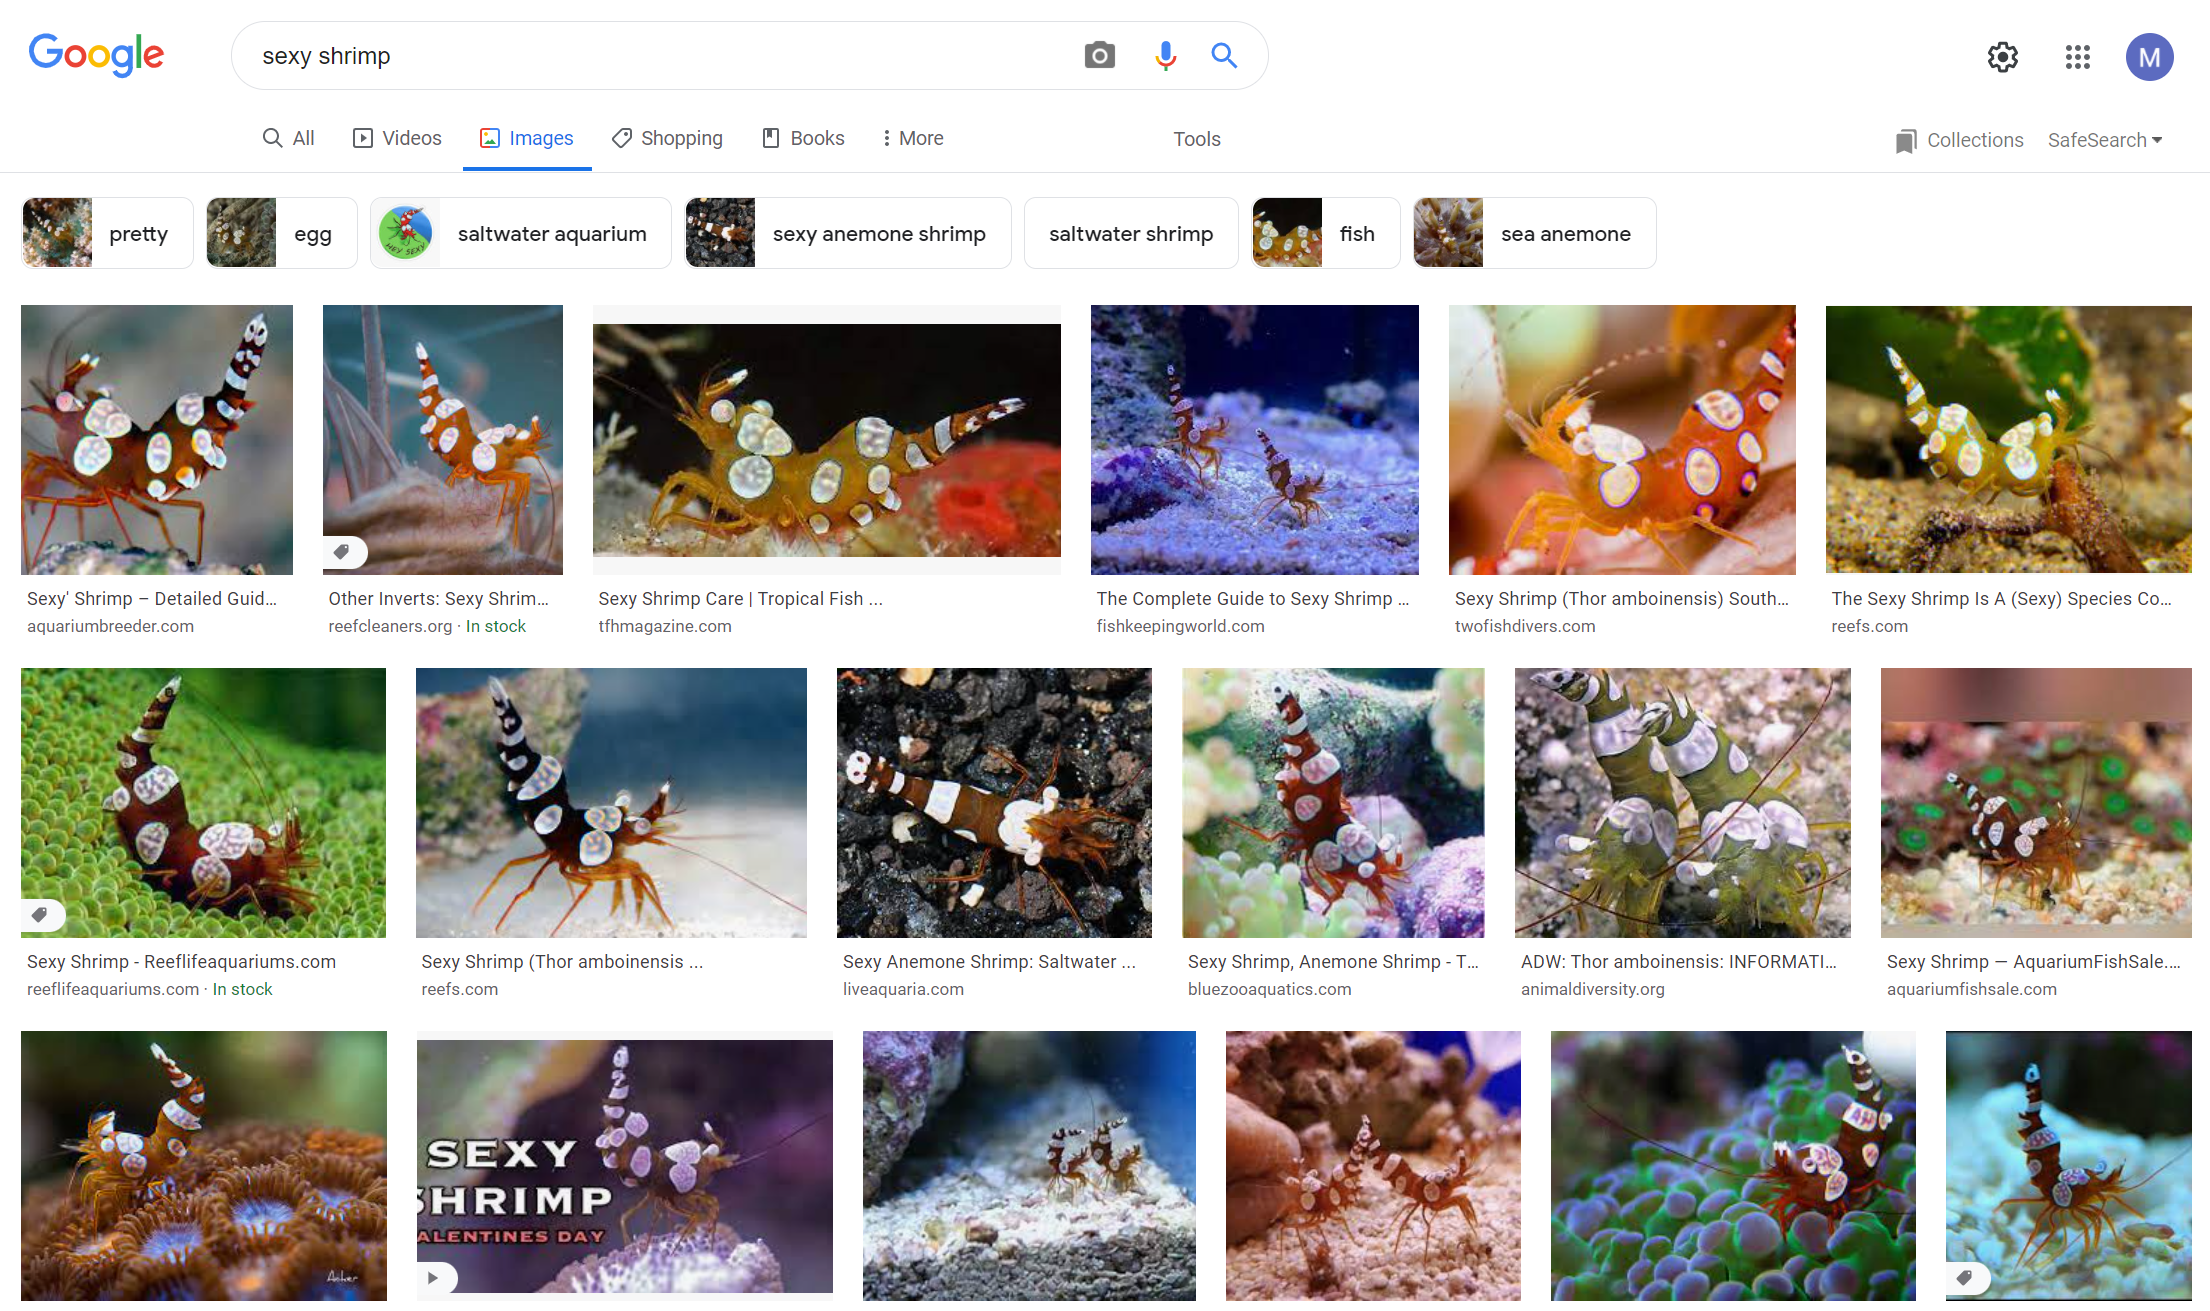 Rows of sexy shrimp images returned from a Google search.